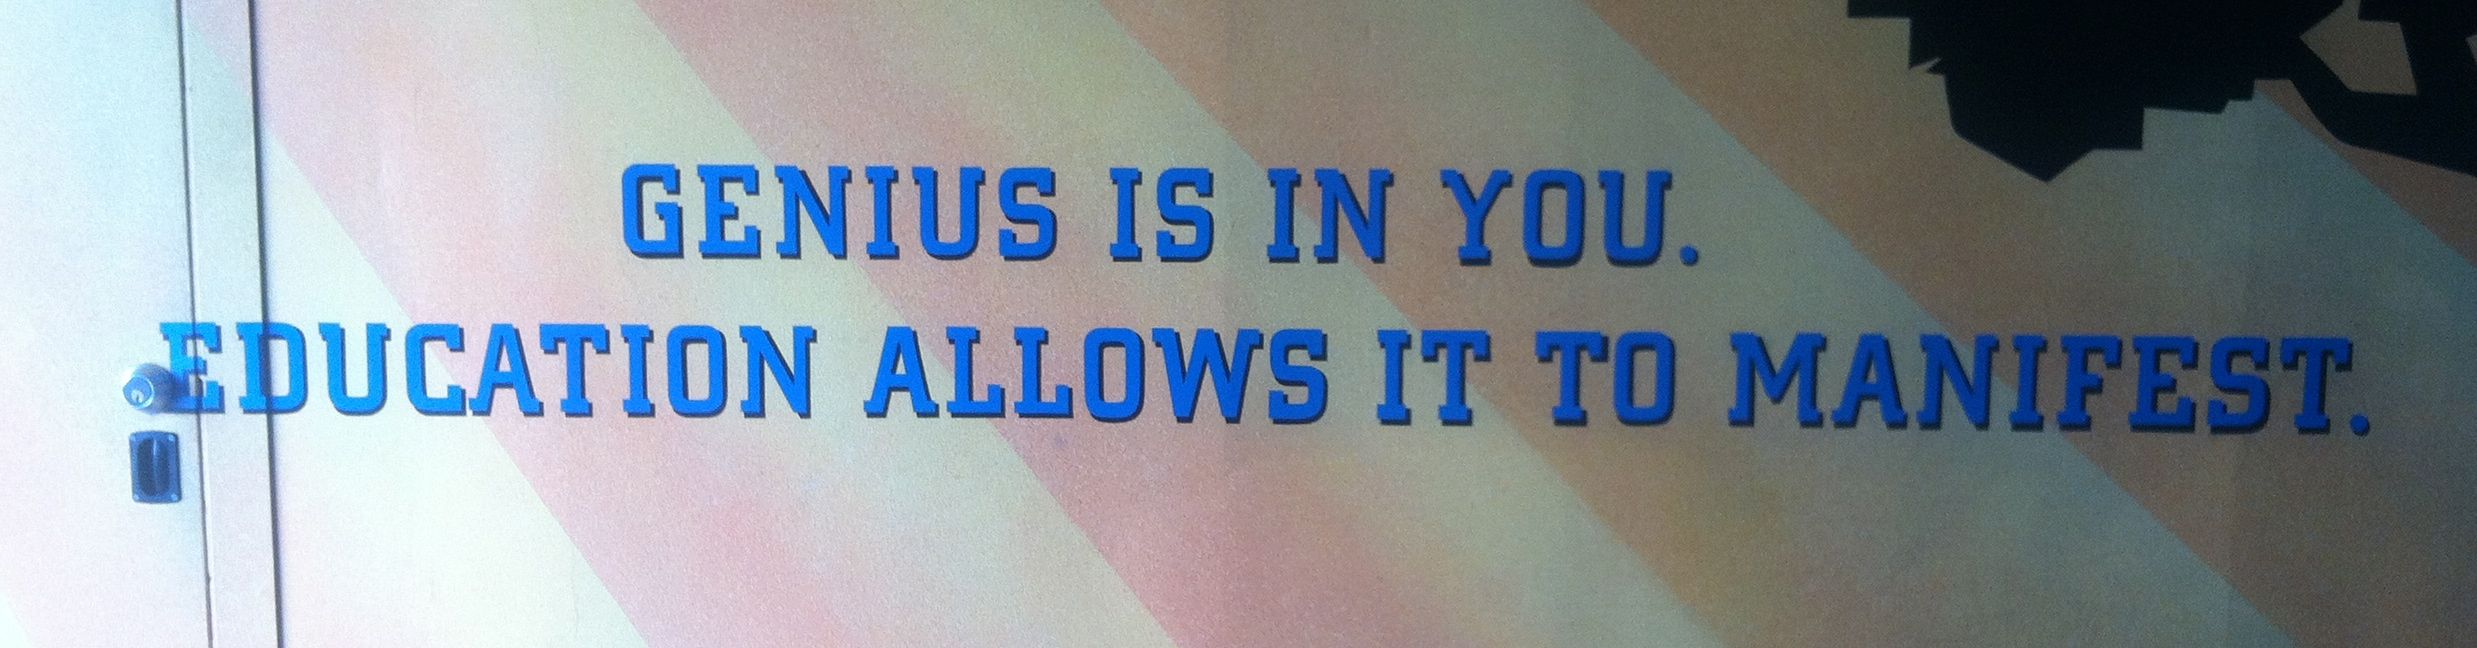 Found this great quote in Innoventions